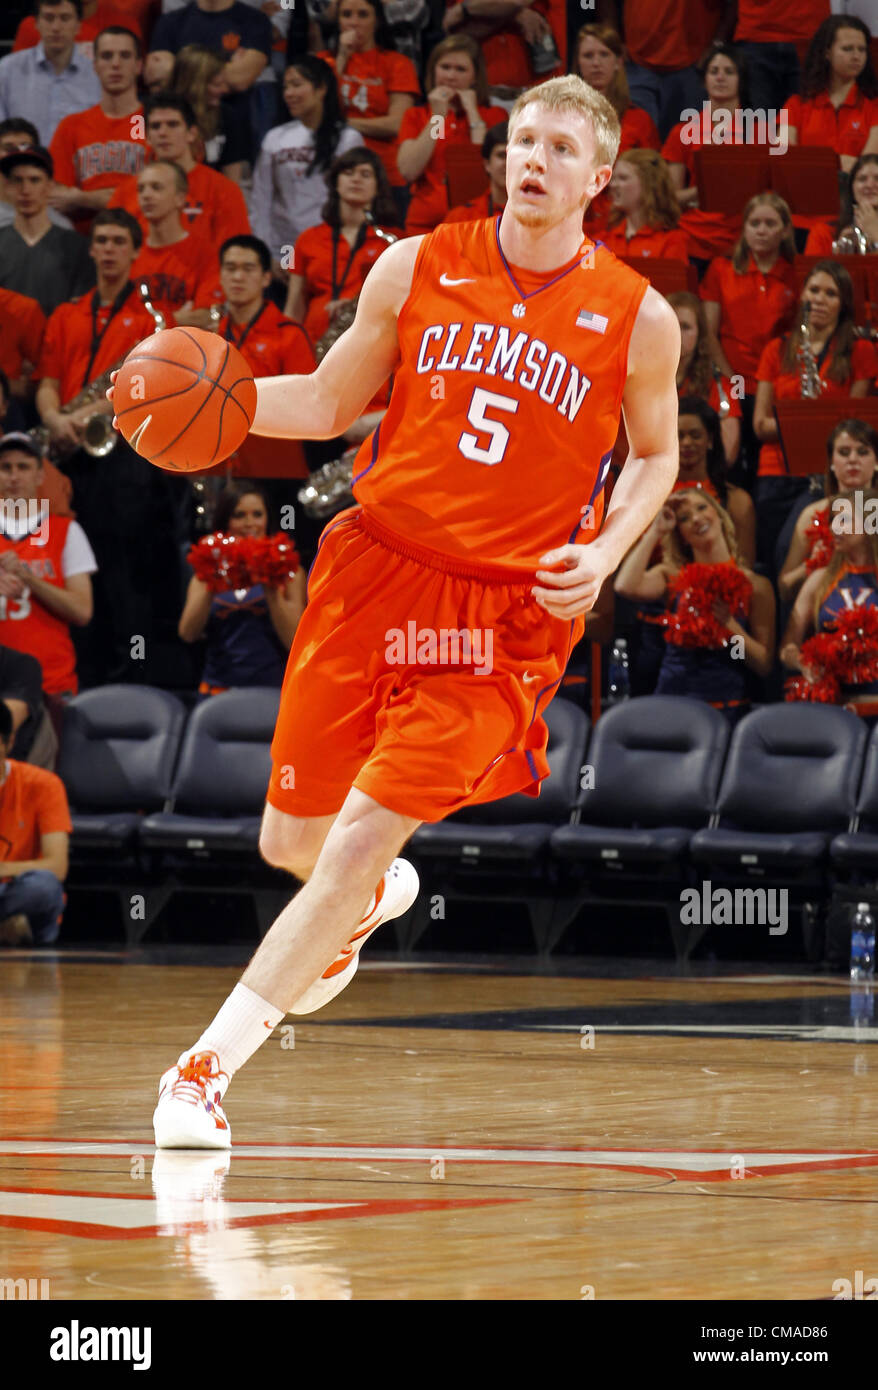 Jan. 31, 2012 - Charlottesville, Virginia, United States - Tanner Smith #5 of the Clemson Tigers handles the ball during the game against the Virginia Cavaliers at the John Paul Jones Arena in Charlottesville, Virginia. Virginia defeated Clemson 65-61. (Credit Image: © Andrew Shurtleff/ZUMAPRESS.com) Stock Photo